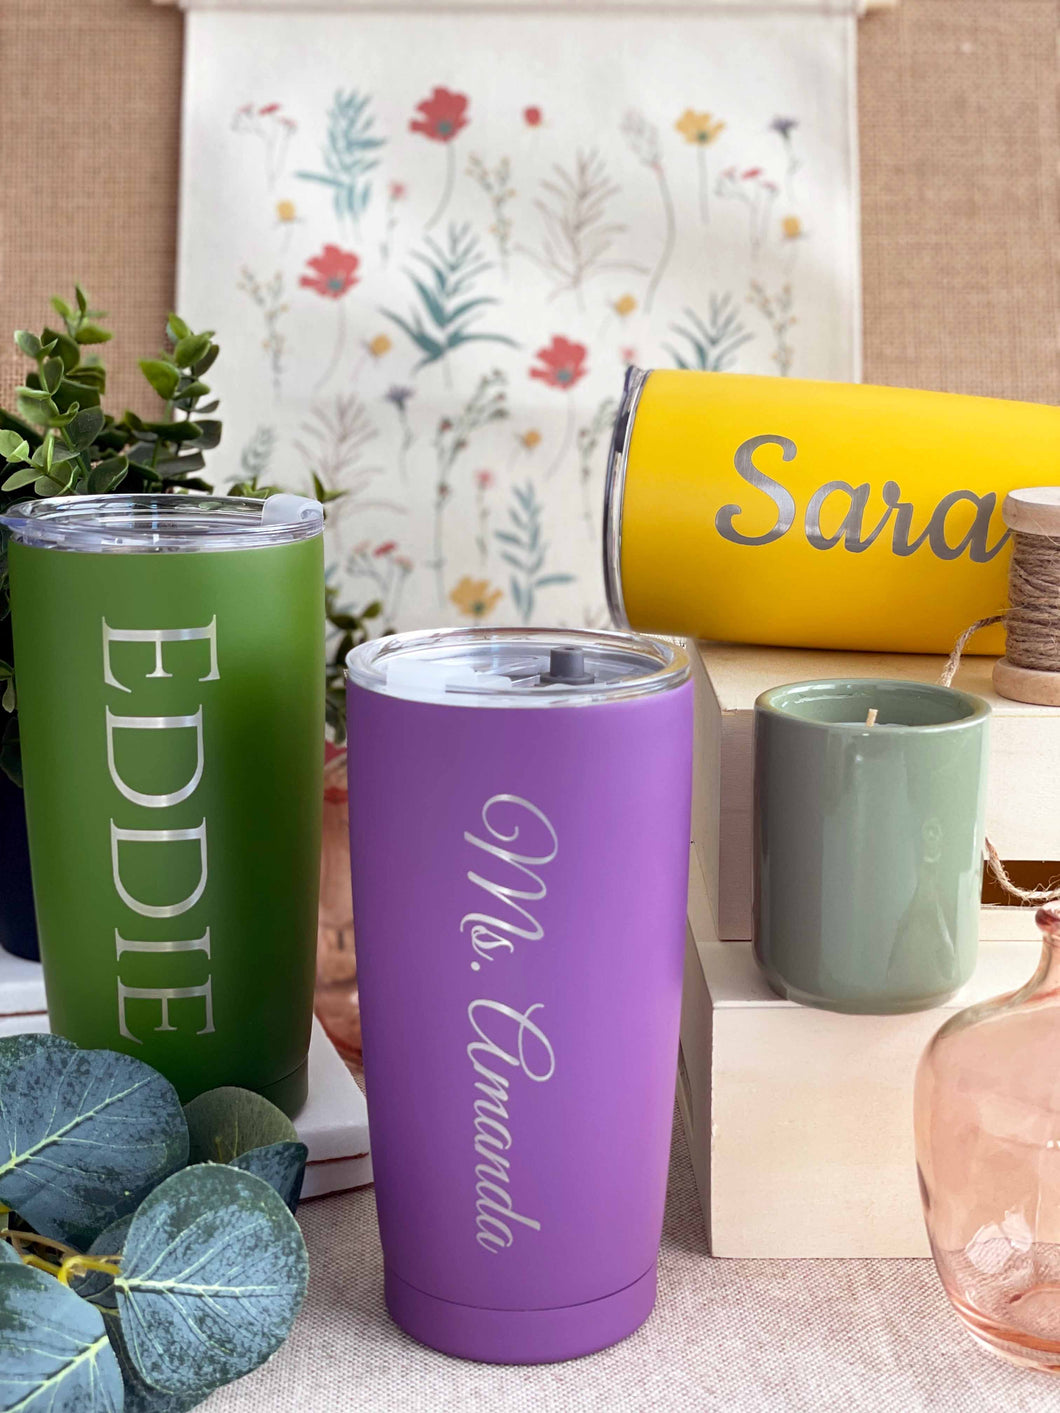 Customizable Engraved 16 oz Insulated Stainless Steel Tumbler Personalized with Custom Text or Name Choice of 10 Colors